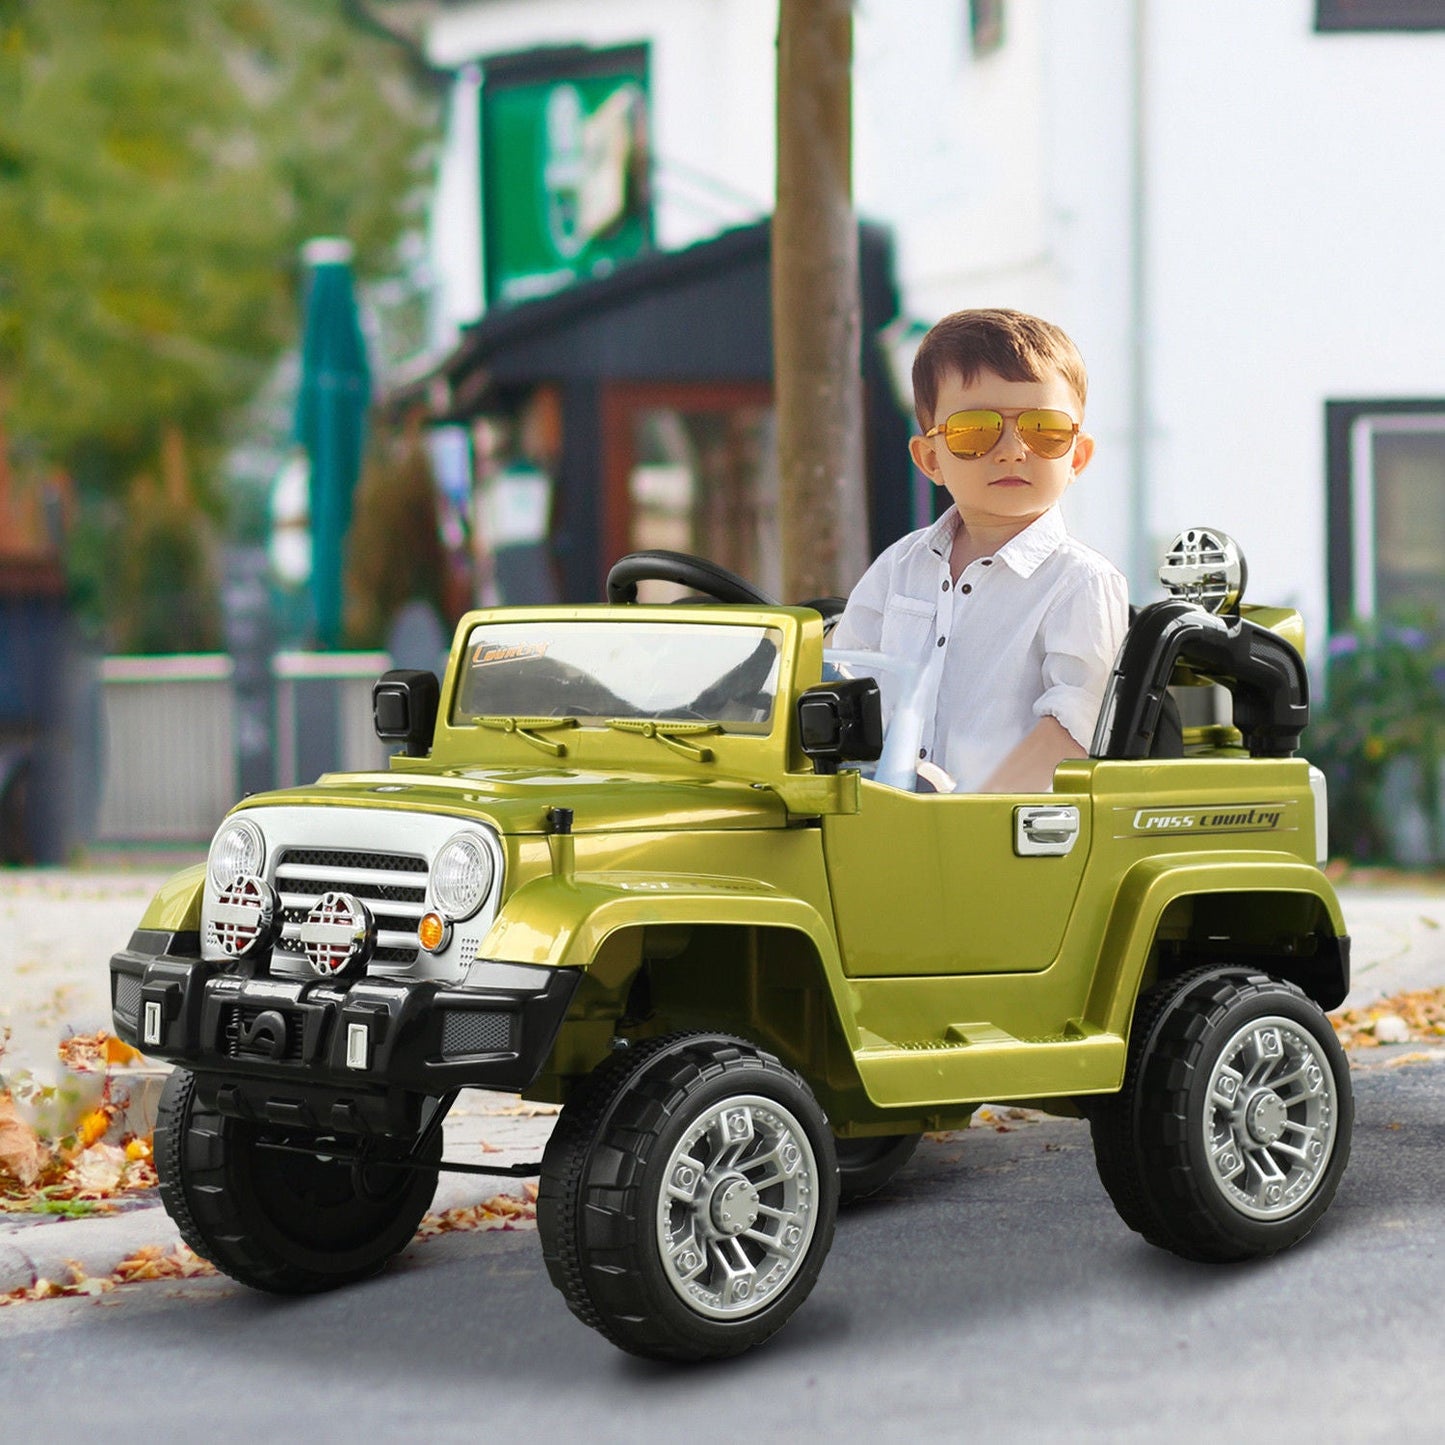 Toys and Games-Kids Electric Ride On Toy Off-Road Truck, Remote Control Ride-on Truck with MP3, Horn, Steering Wheel & Dual 6V Motor for Toddler, Green - Outdoor Style Company